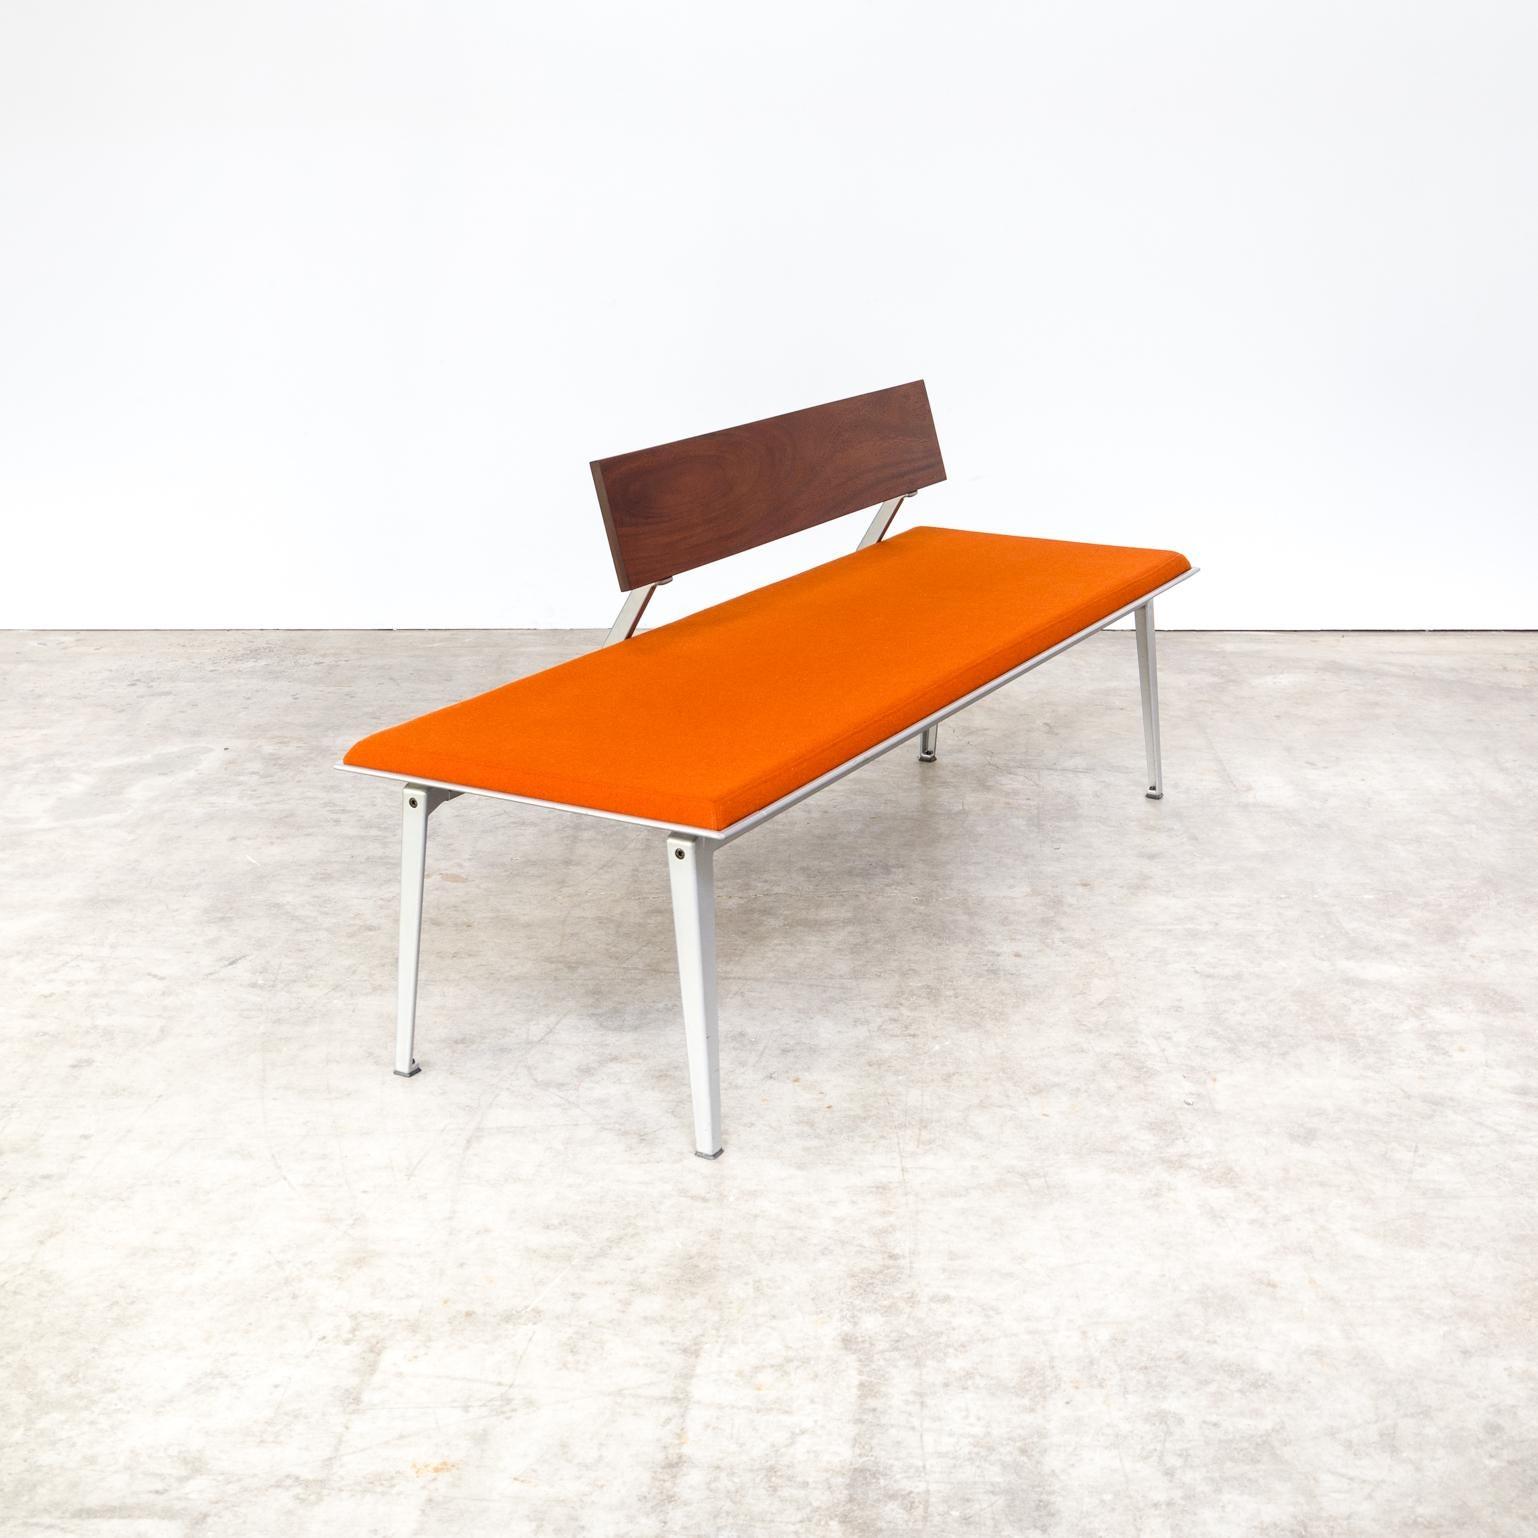 1990s Bas Pruyser ‘Ahrend 600’ Museum Bench for Ahrend de Cirkel For Sale 4